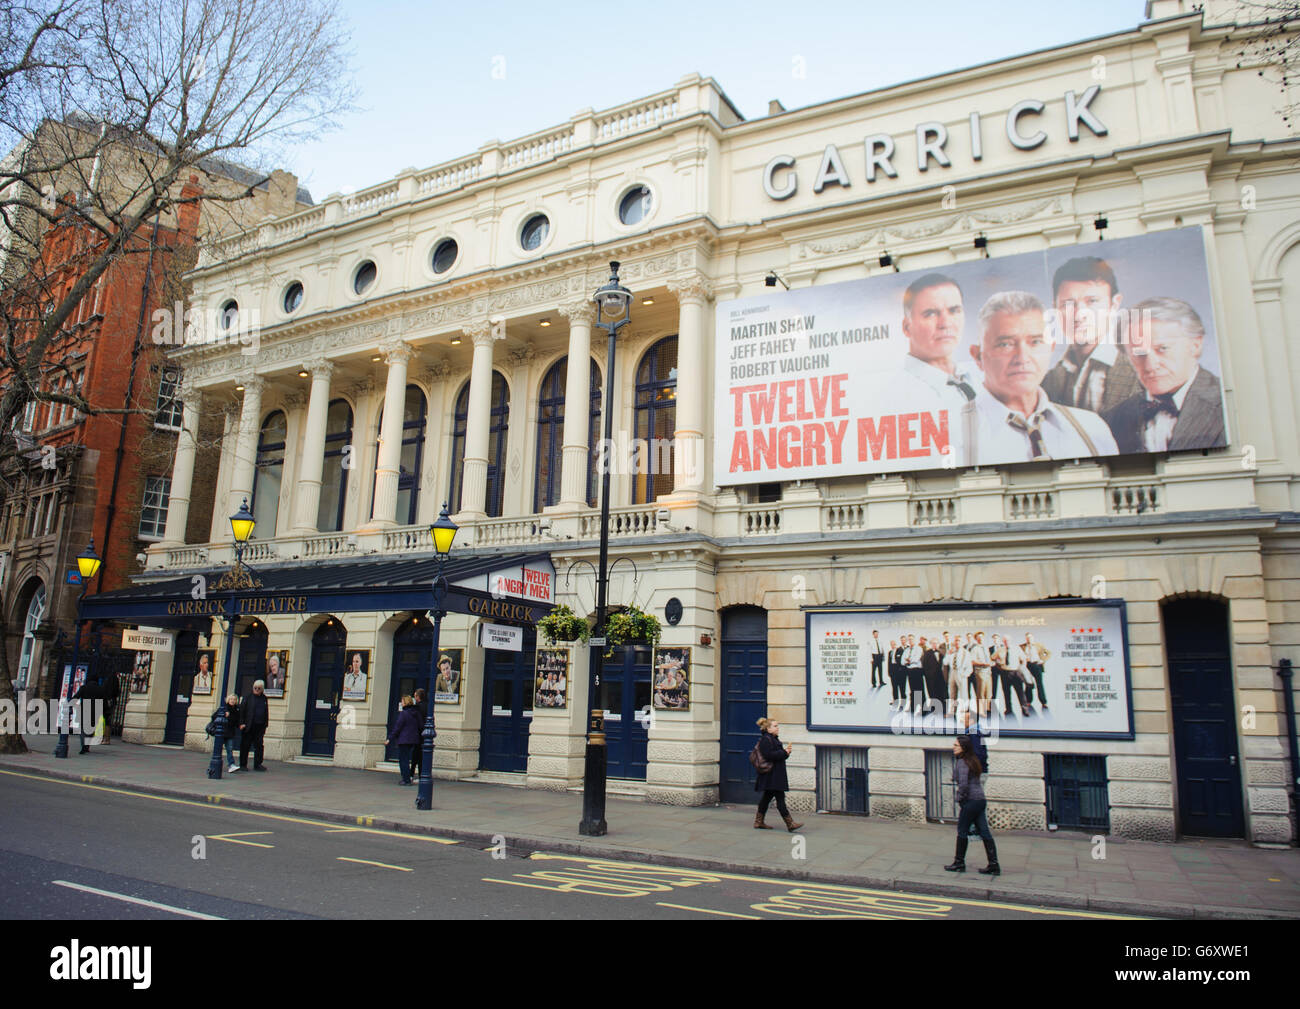 General view of the Garrick Theatre, in central London. Stock Photo